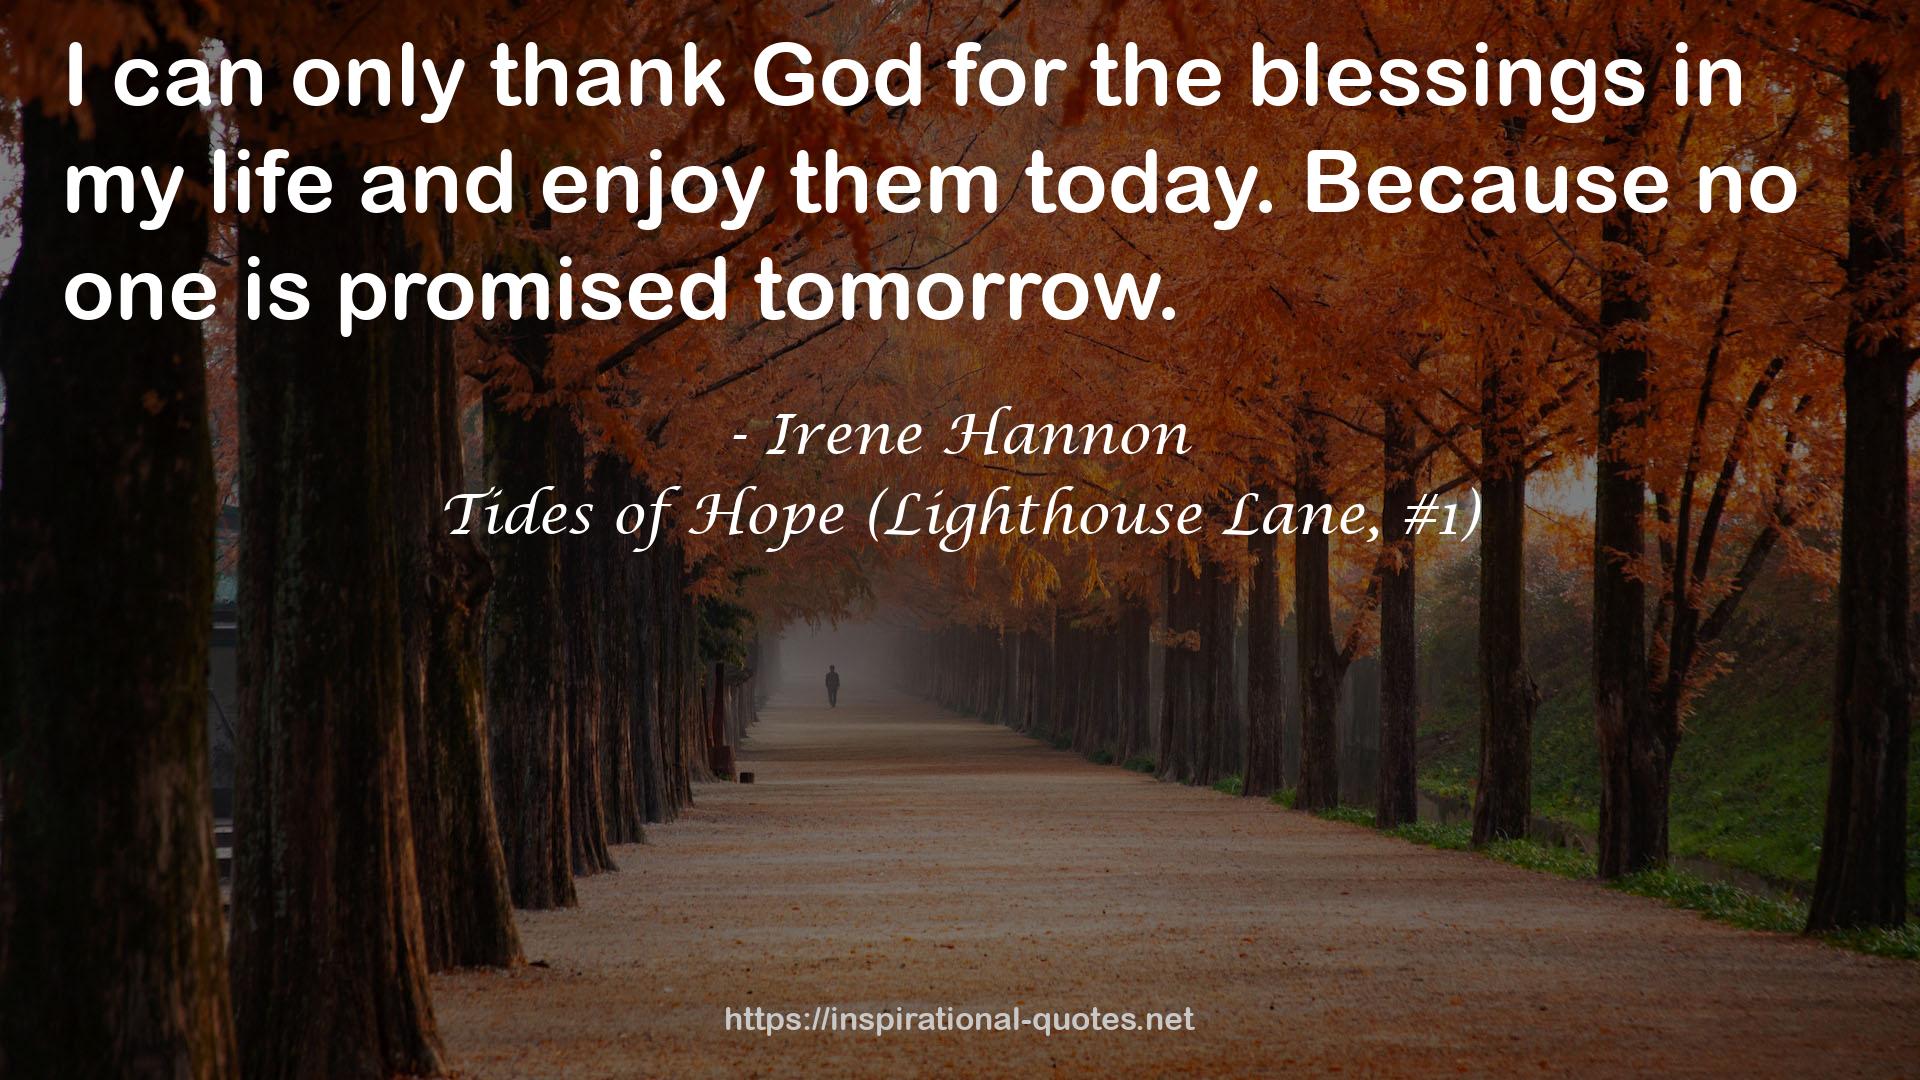 Tides of Hope (Lighthouse Lane, #1) QUOTES